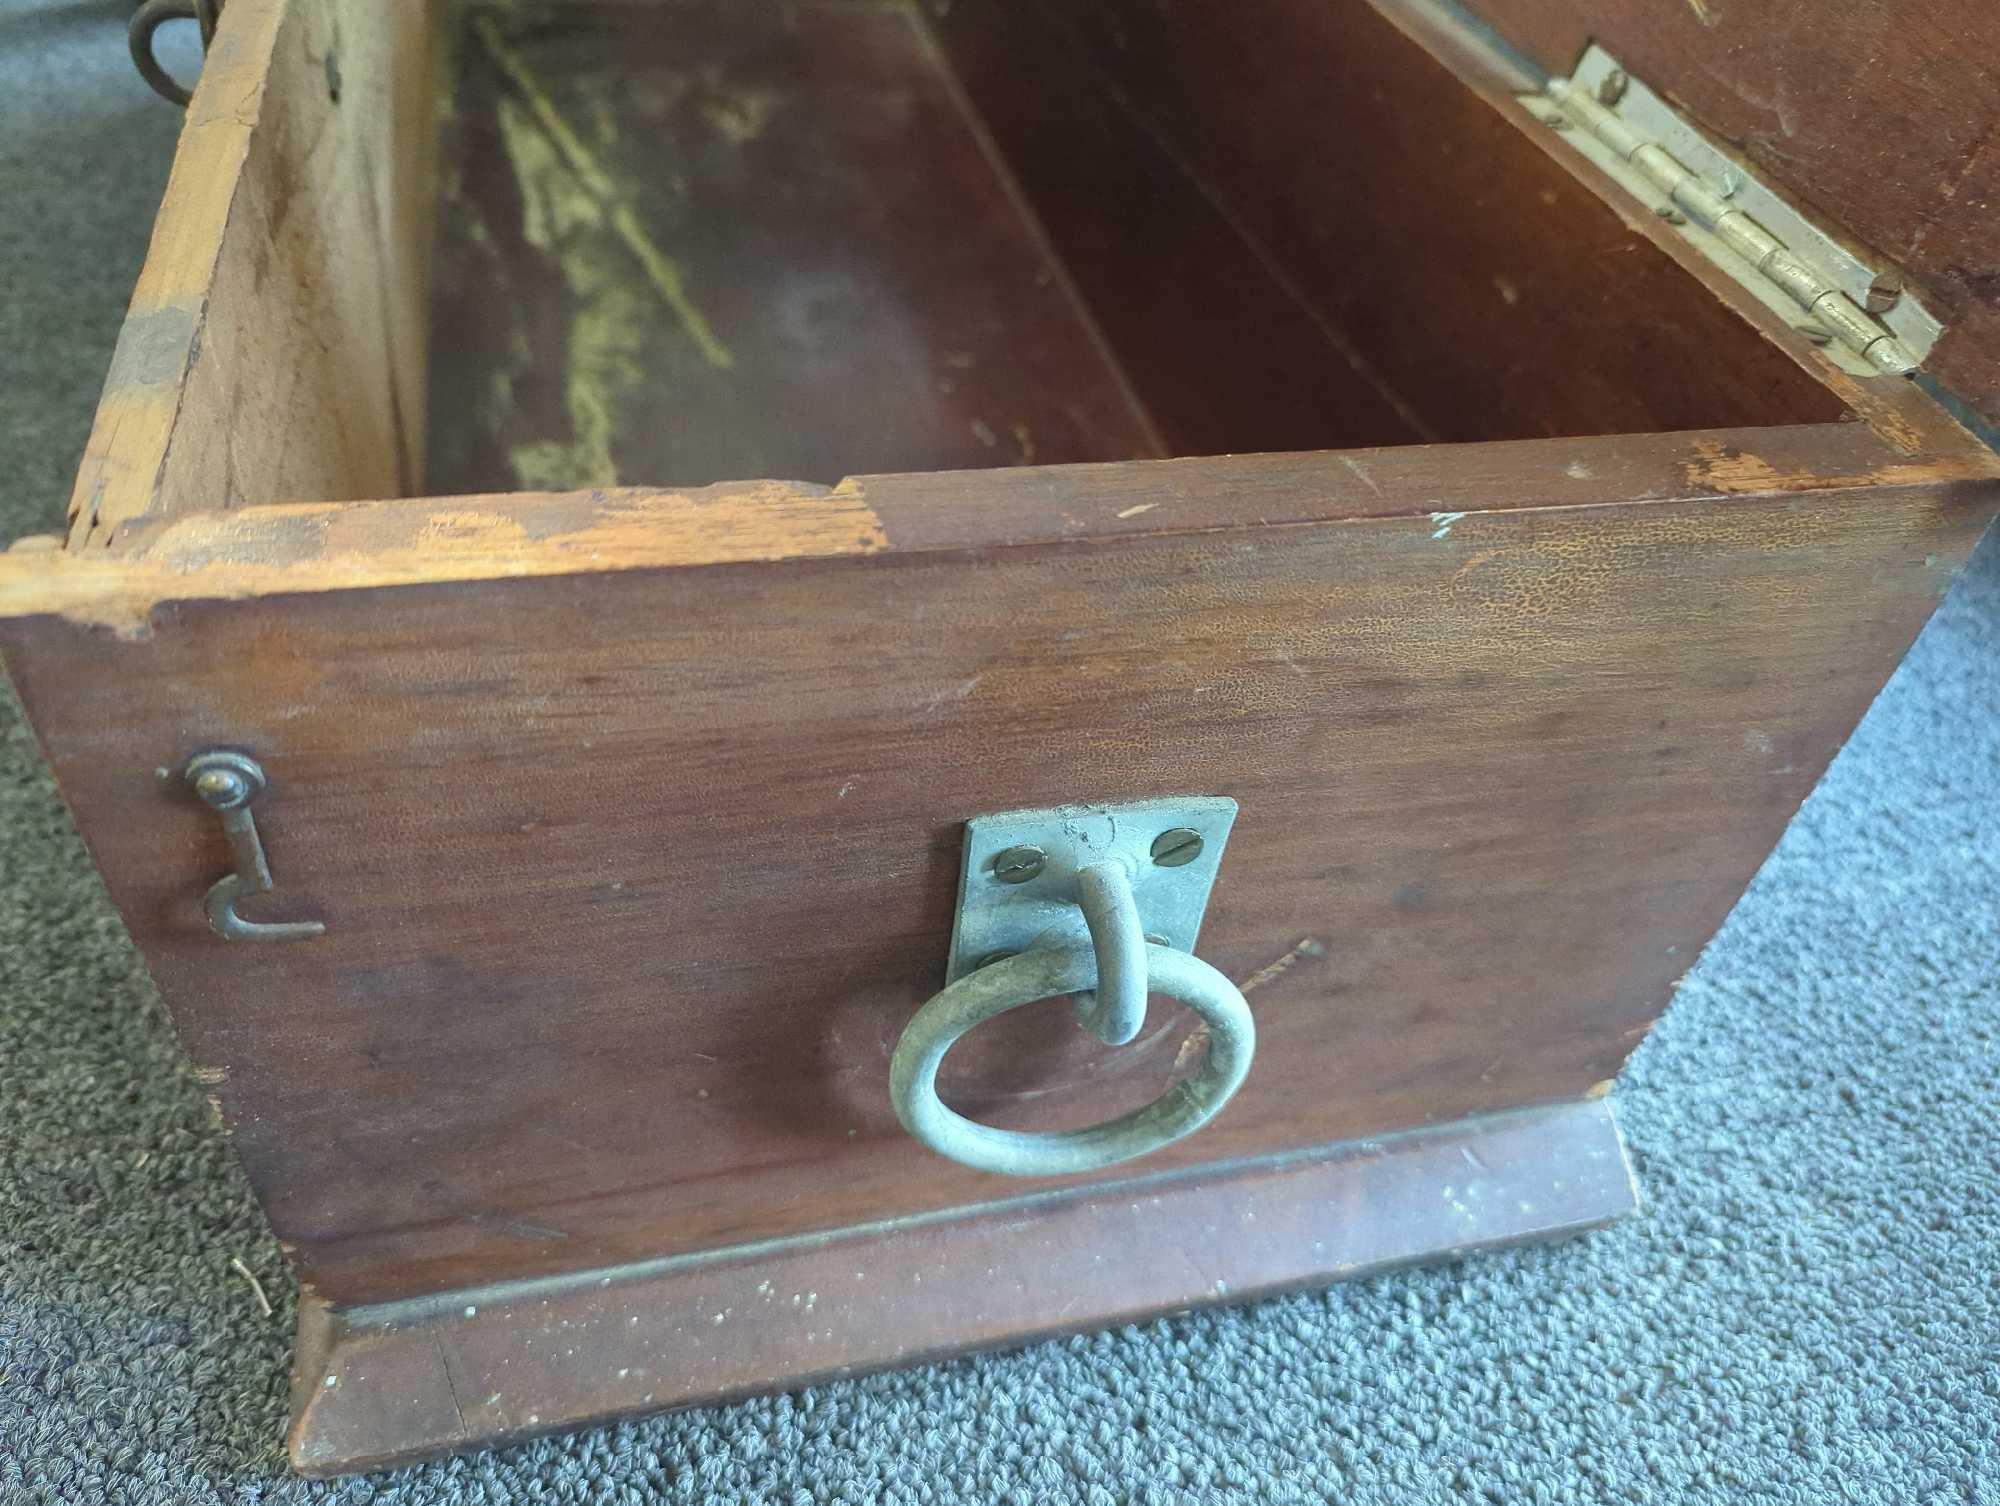 Replica of a 19th Century Seaman?s Chest, Measure Approximately 33 in x 12 in x 9 in, Has Some Signs